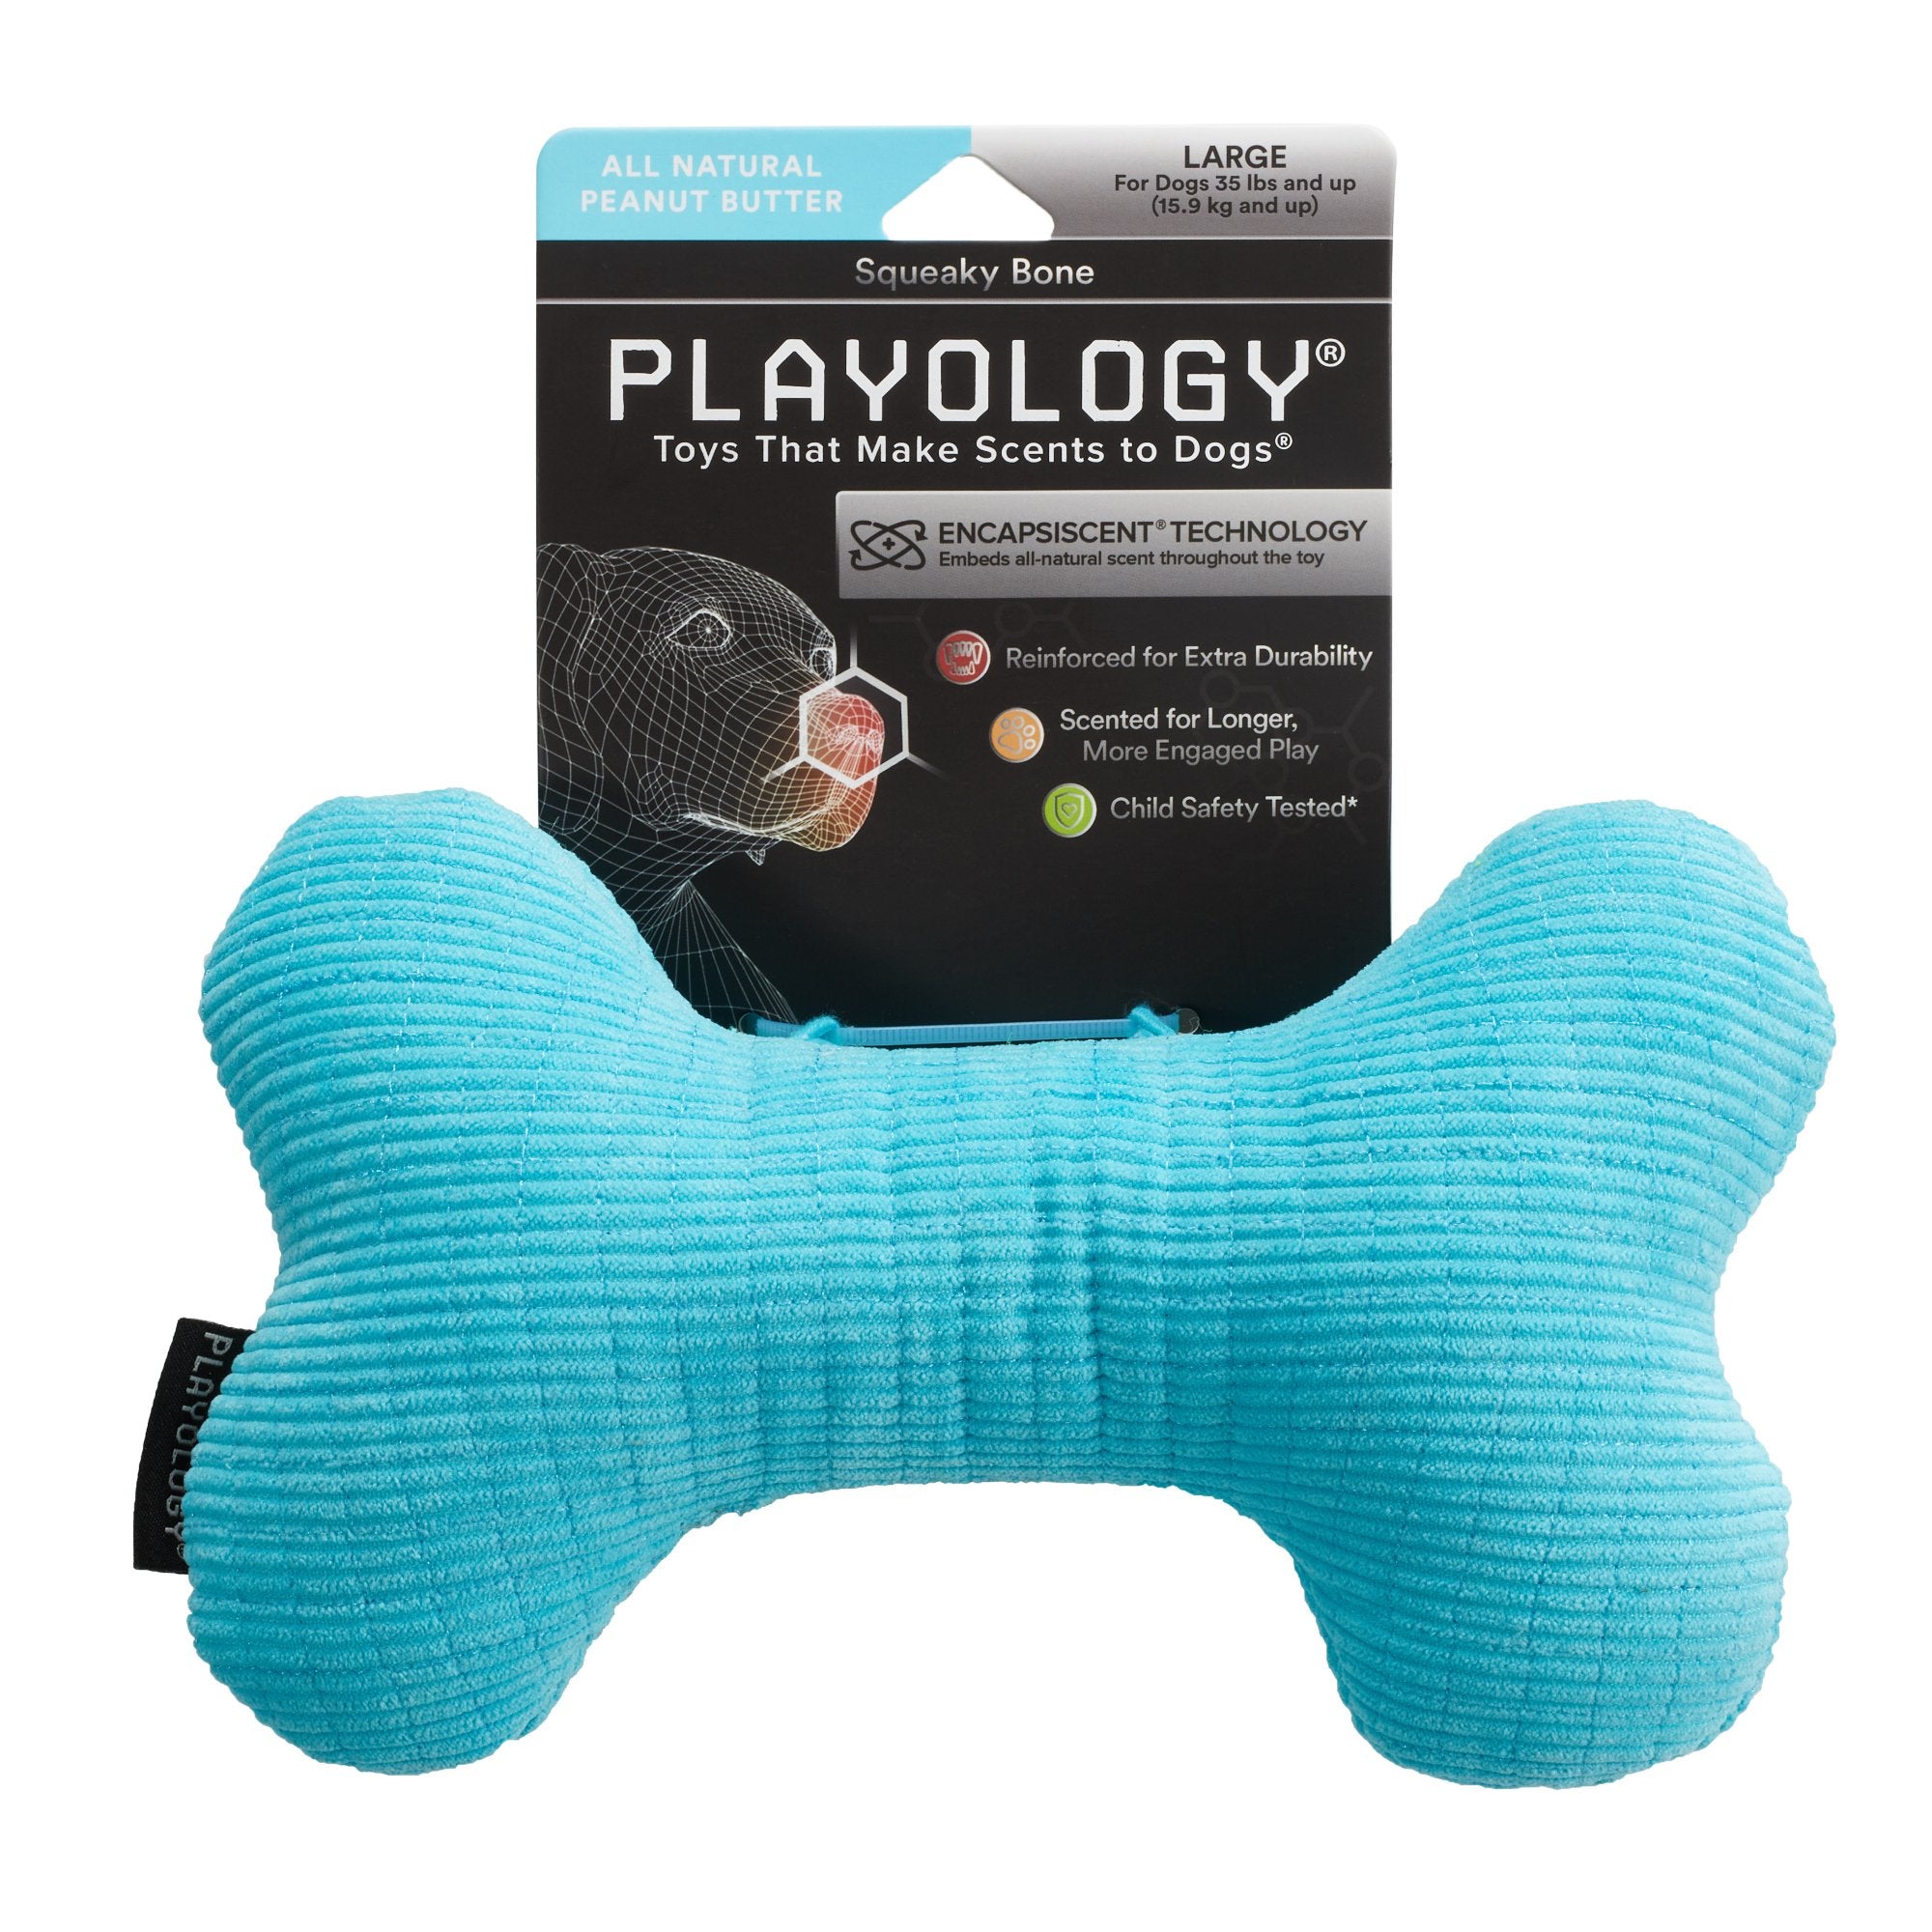 Playology Plush Squeaky Bone Dog Toy Peanut Butter - Mutts & Co.